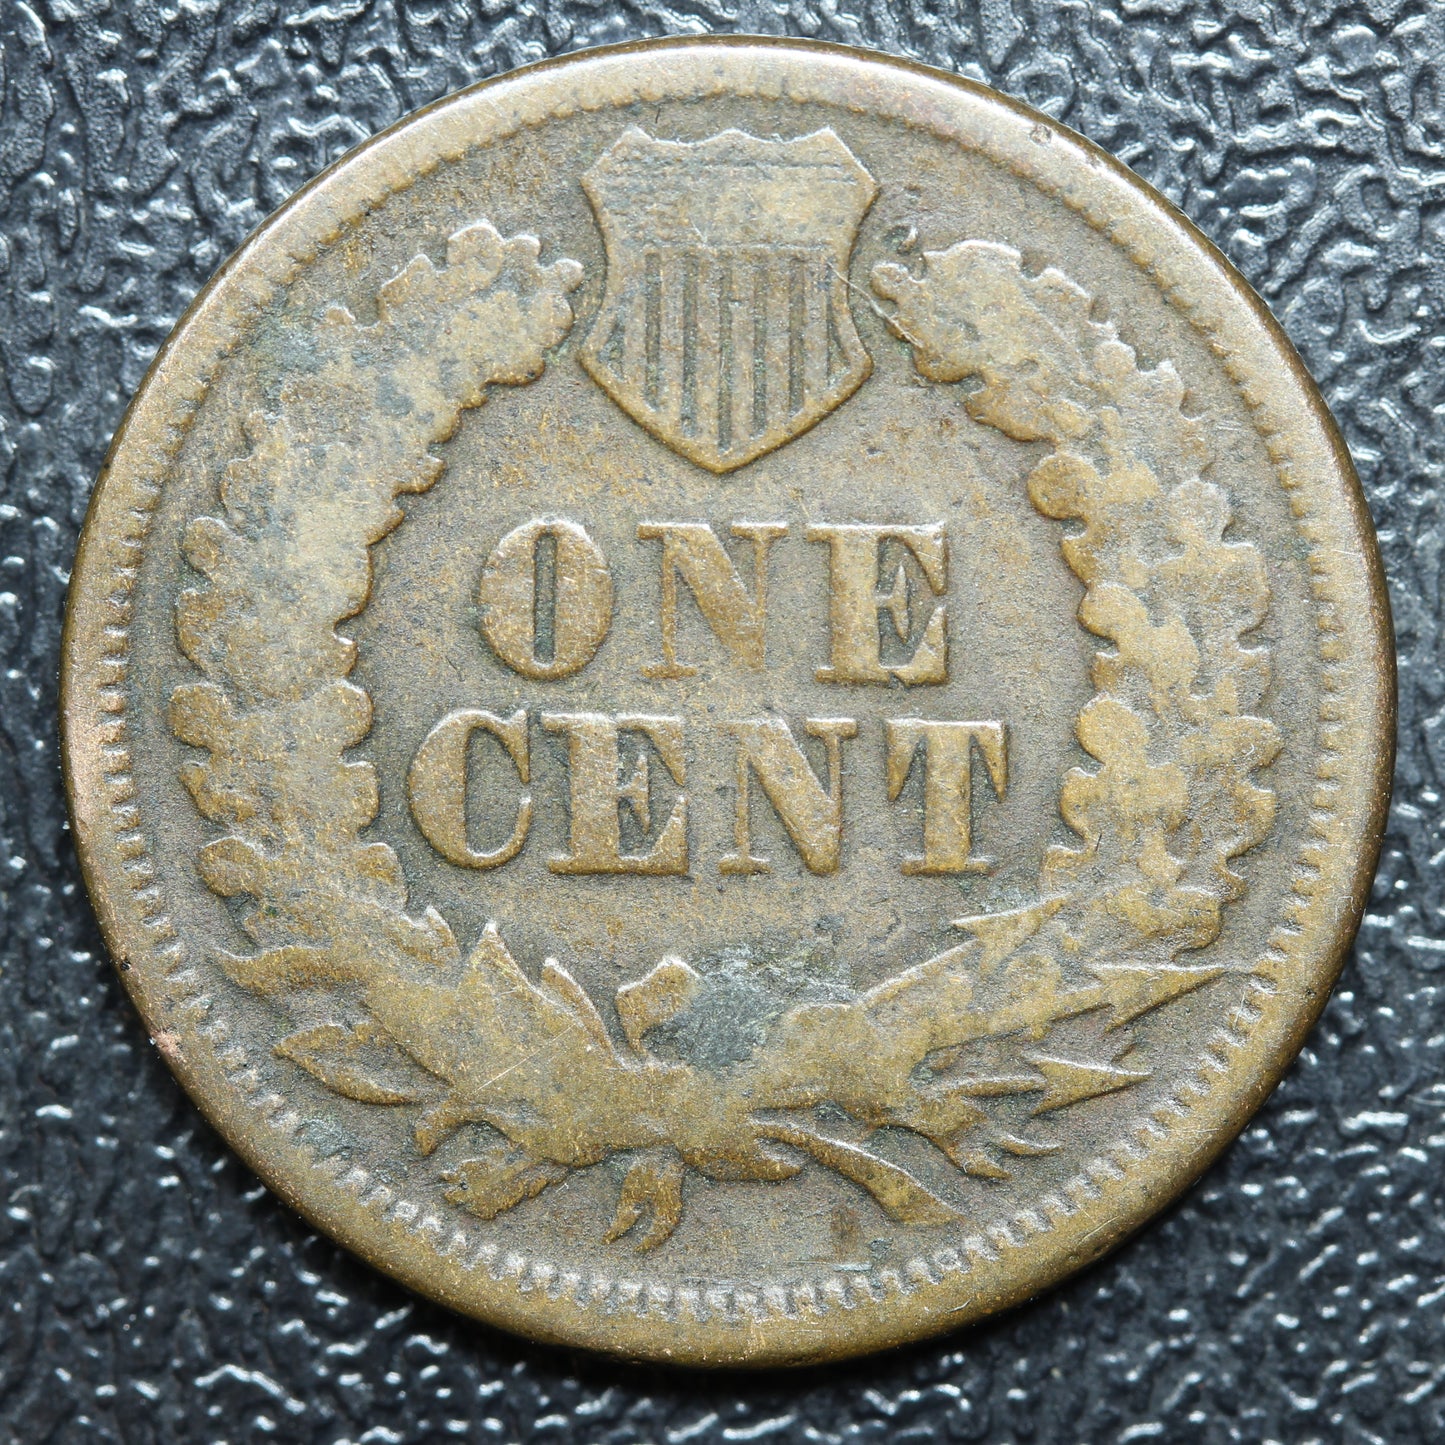 1864 "L" Indian Head Cent, L Not Visible Pointed Bust